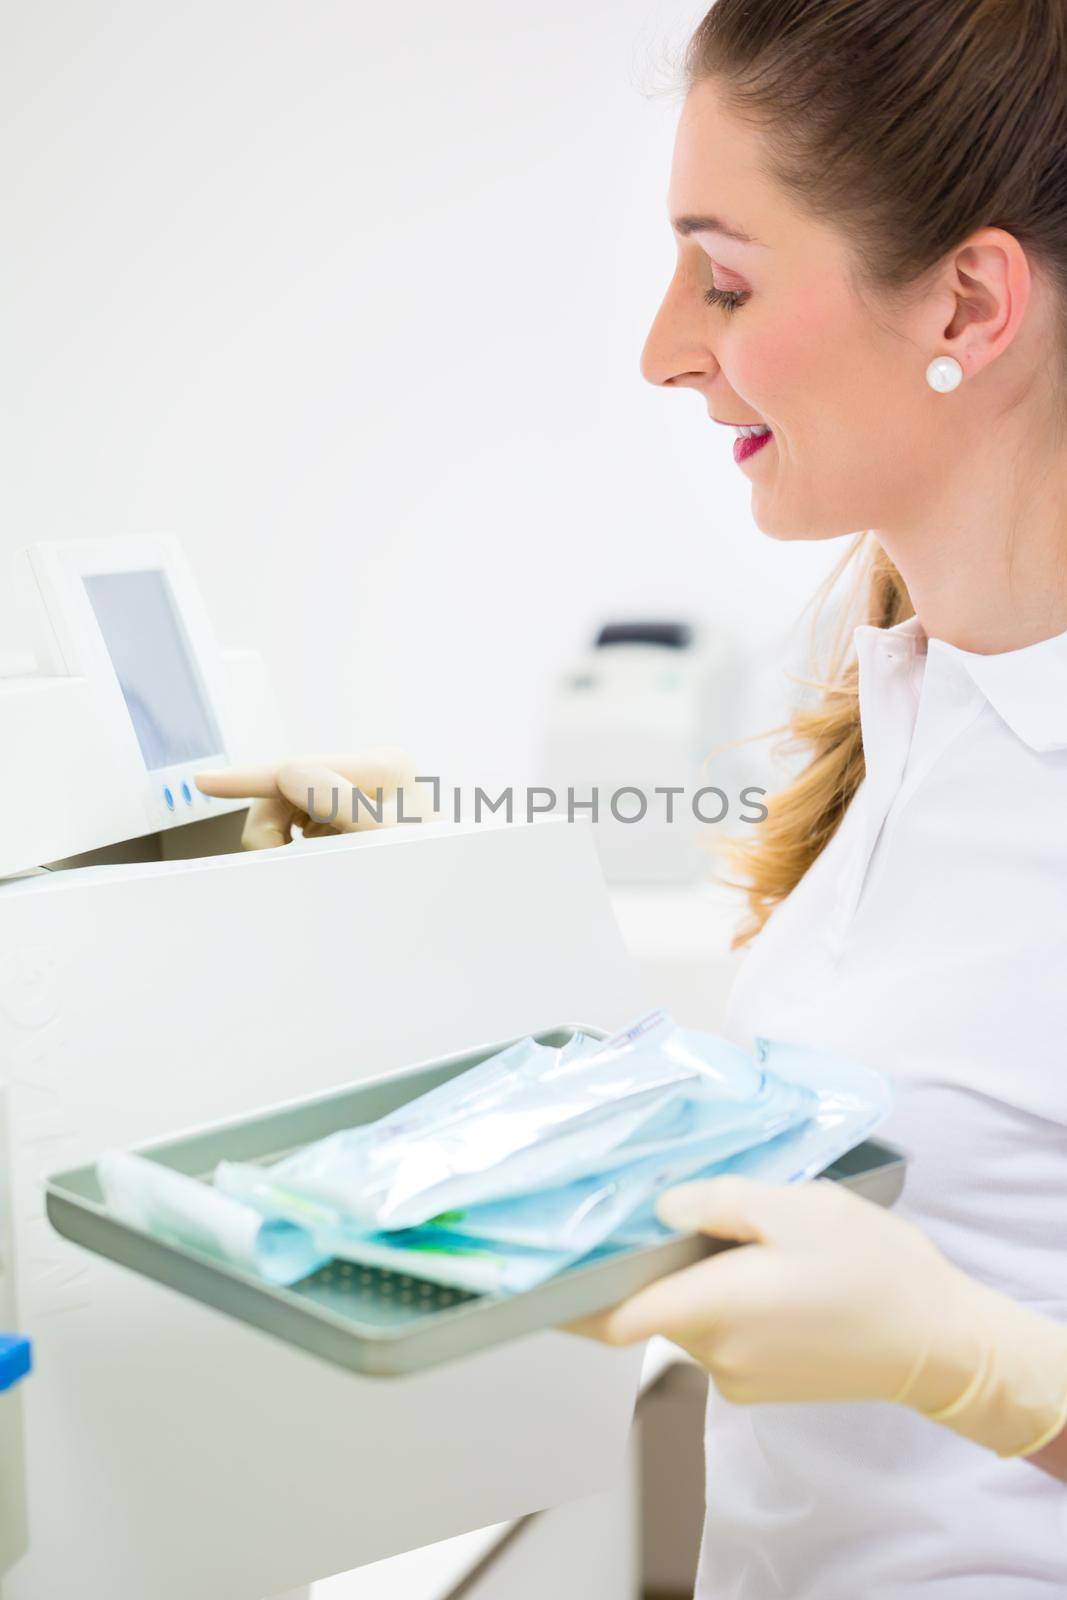 Assistant with sterile dentist tools by Kzenon